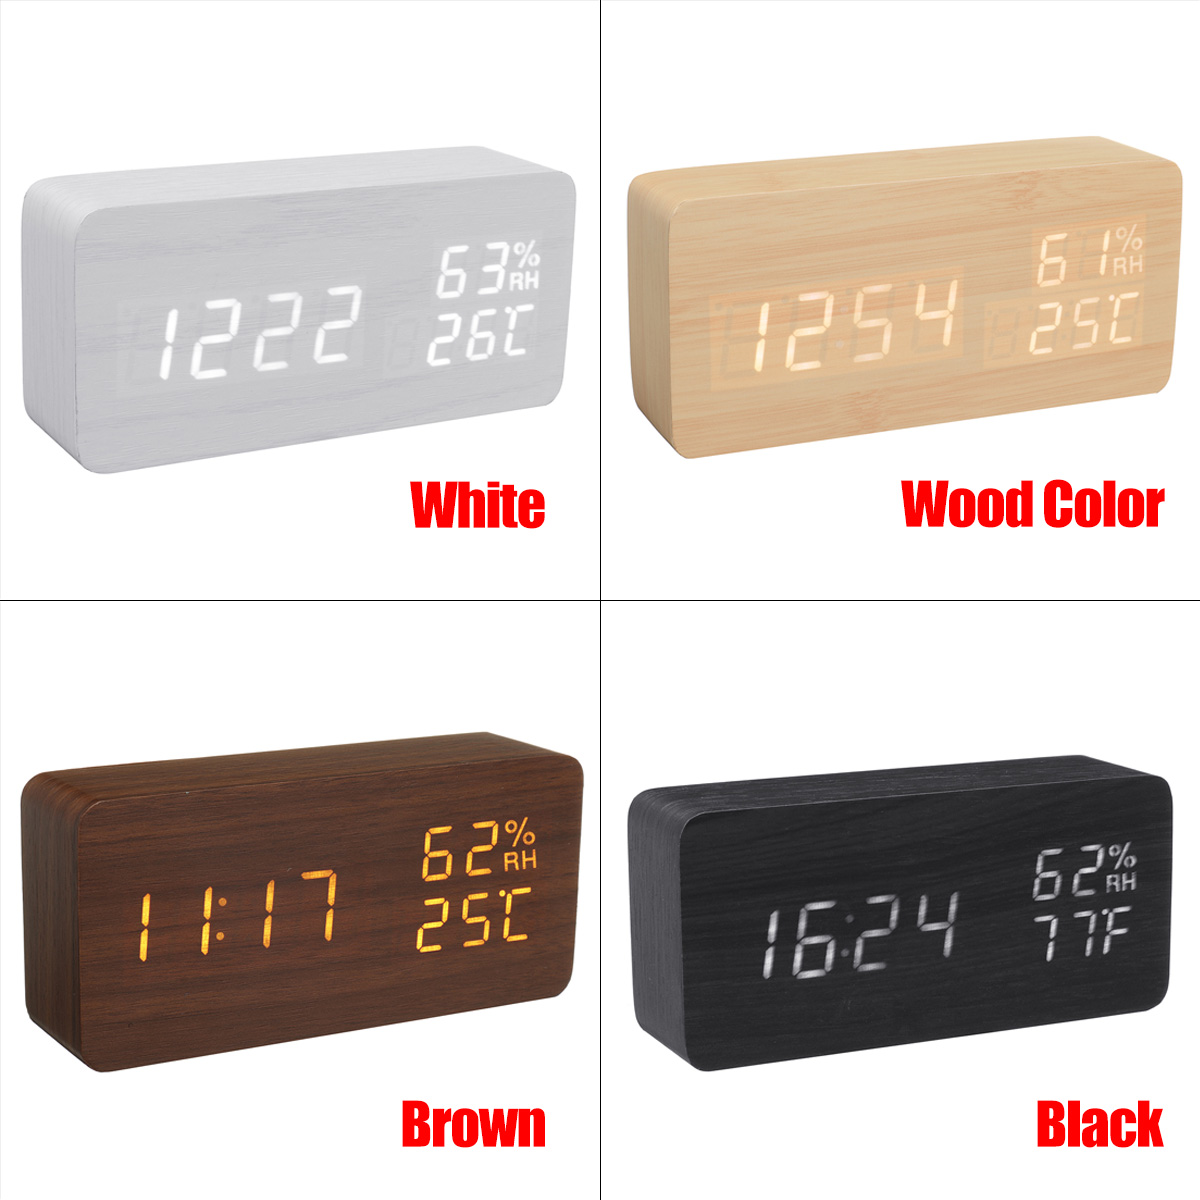 Modern-Wooden-Wood-Digital-Thermometer-USB-Charger-LED-Desk-Alarm-Wireless-Clock-1739446-4